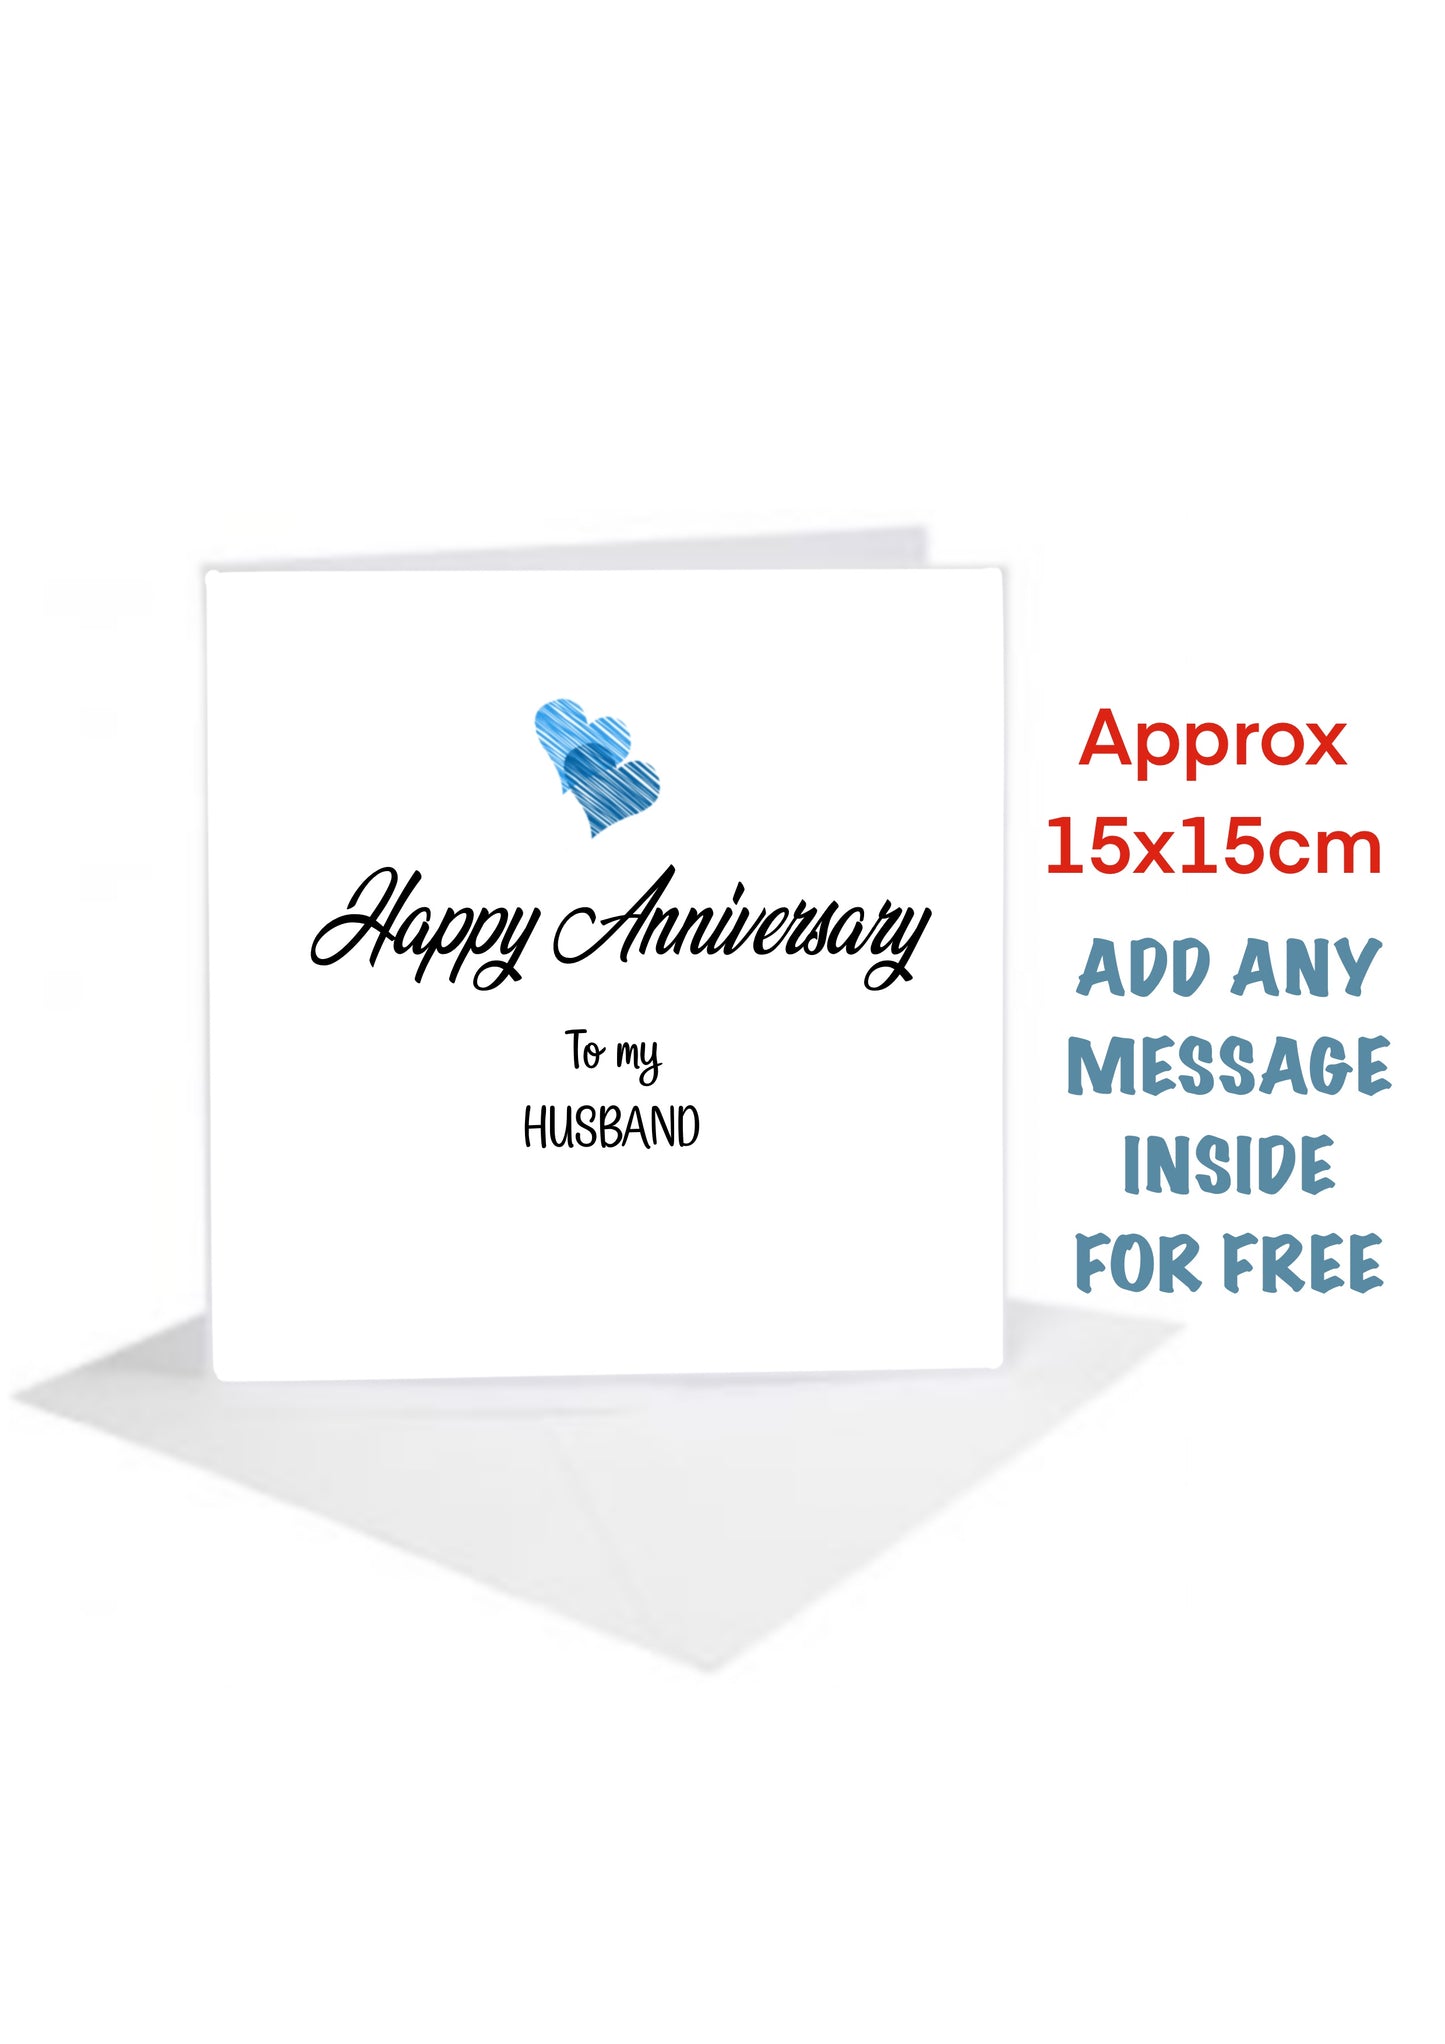 Happy Anniversaary Cards blue heart to my husband